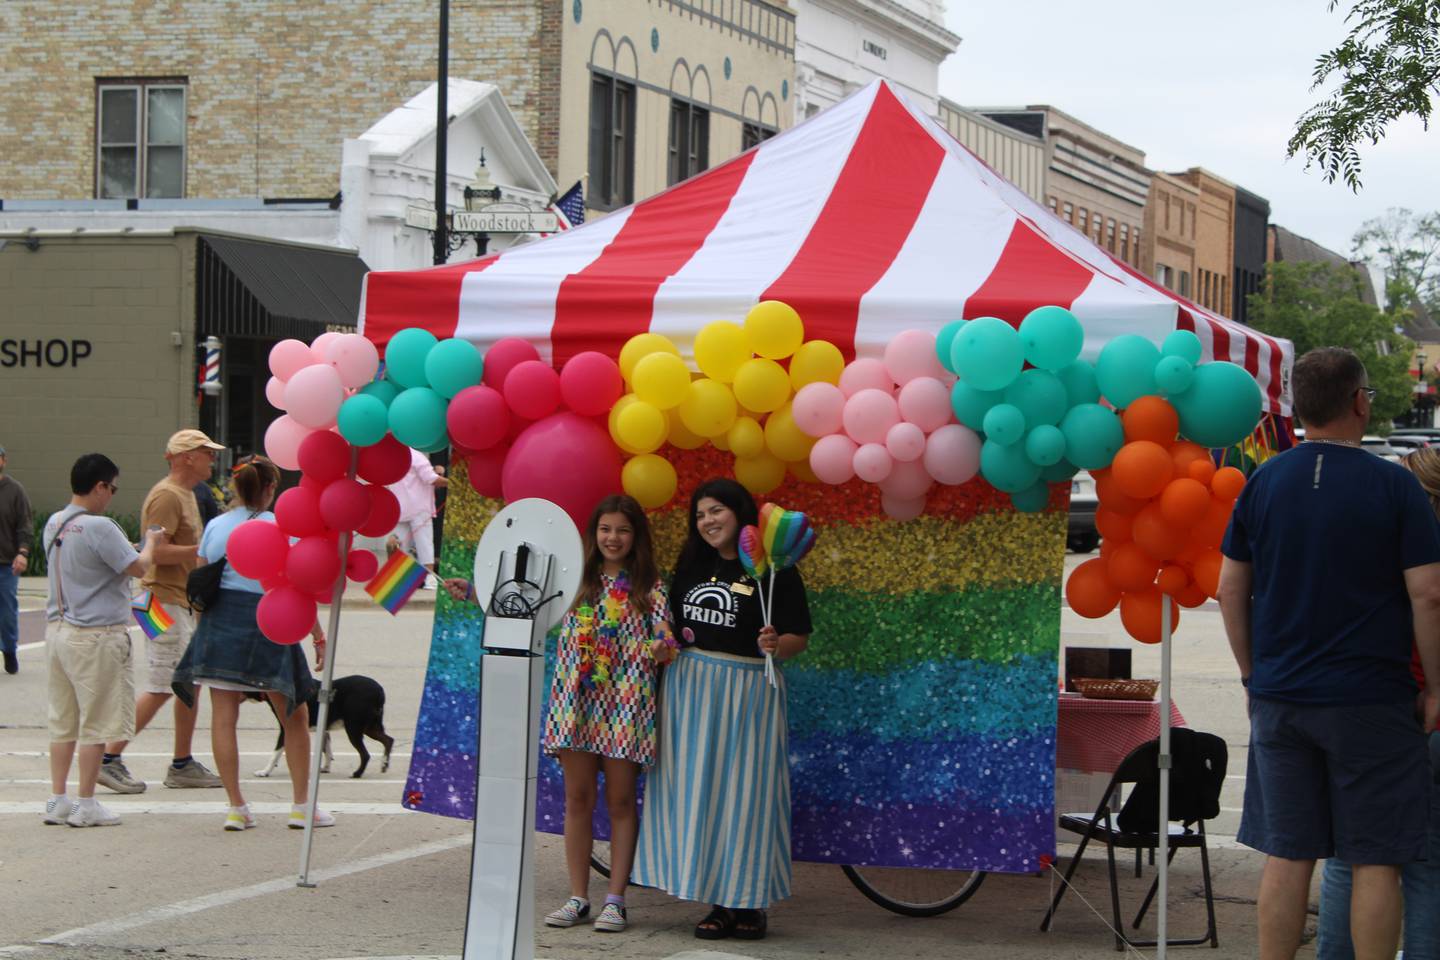 Over 100 people gathered Sunday morning in downtown Crystal Lake to celebrate the city’s first gay pride event with music, food, a vendor market and karaoke.